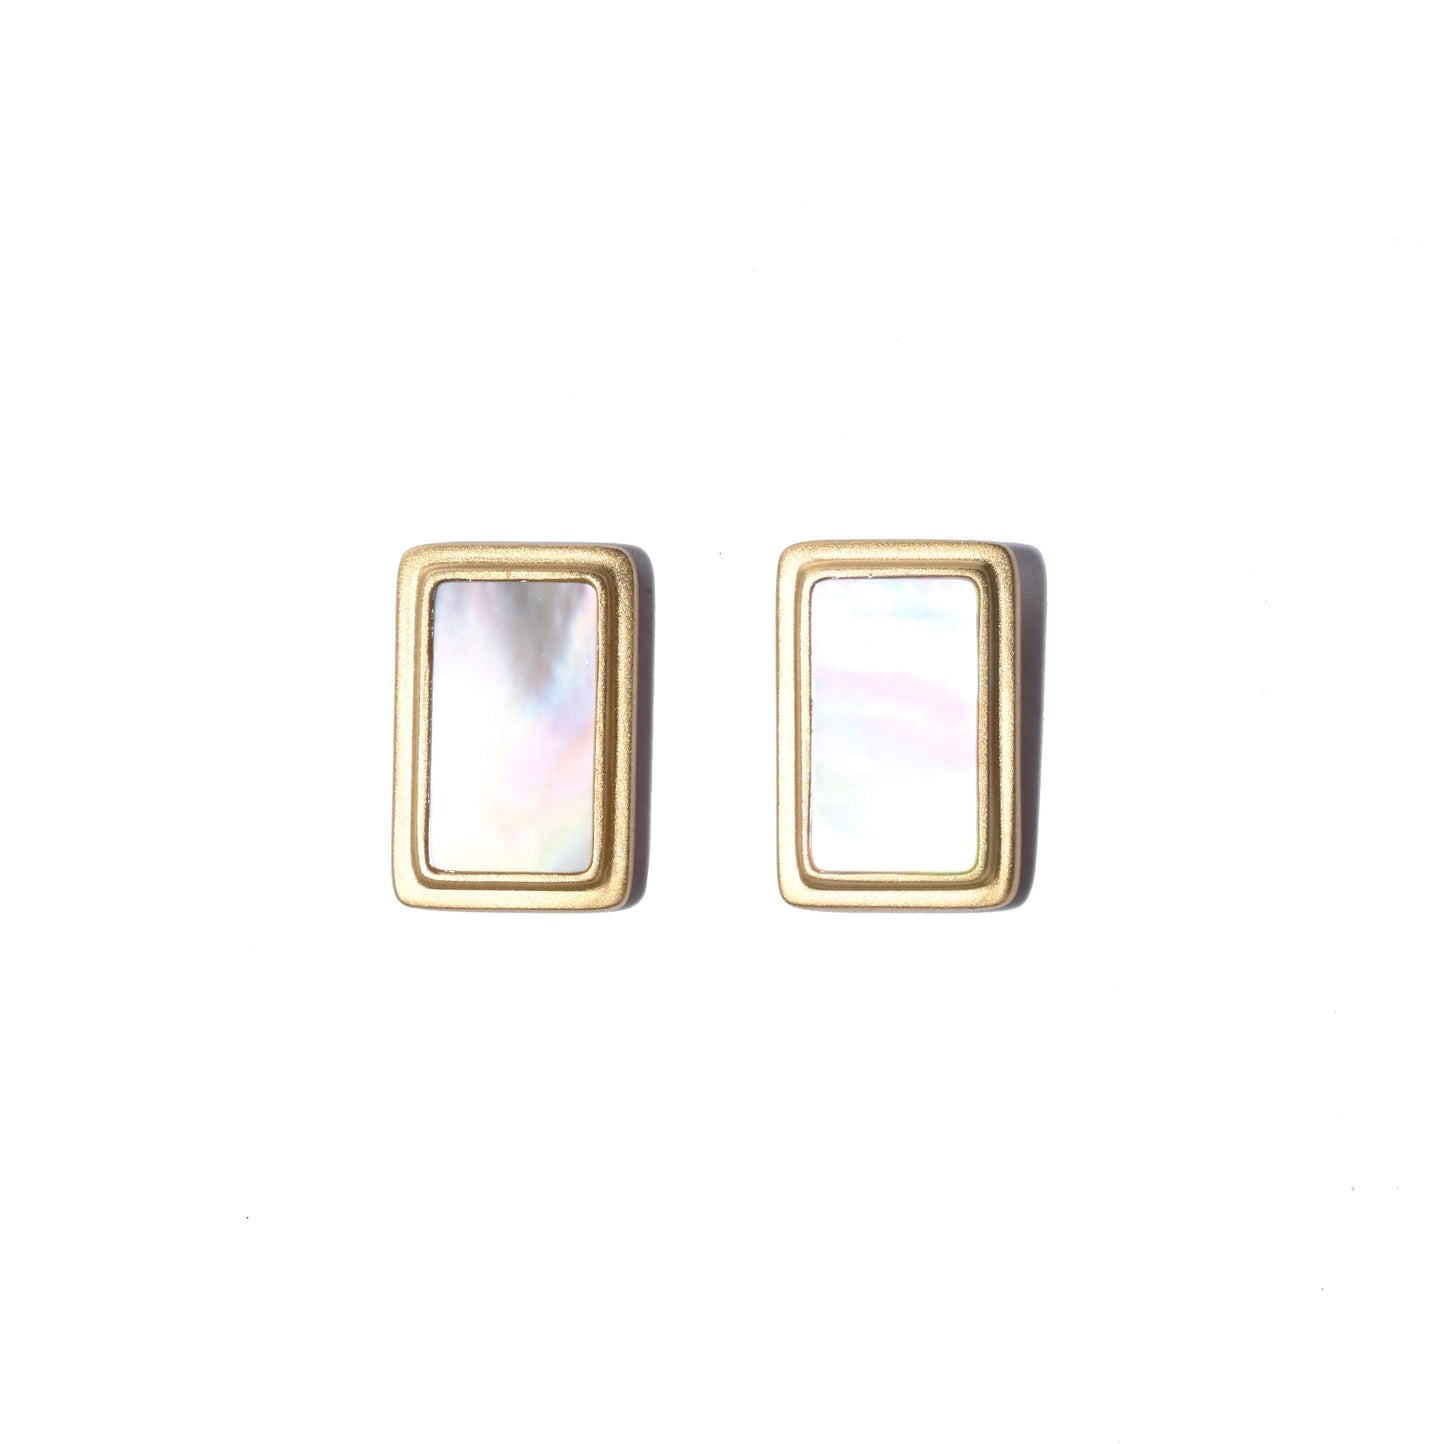 Black And White - 18K Gold Mother-of-Pearl Rectangle Earrings